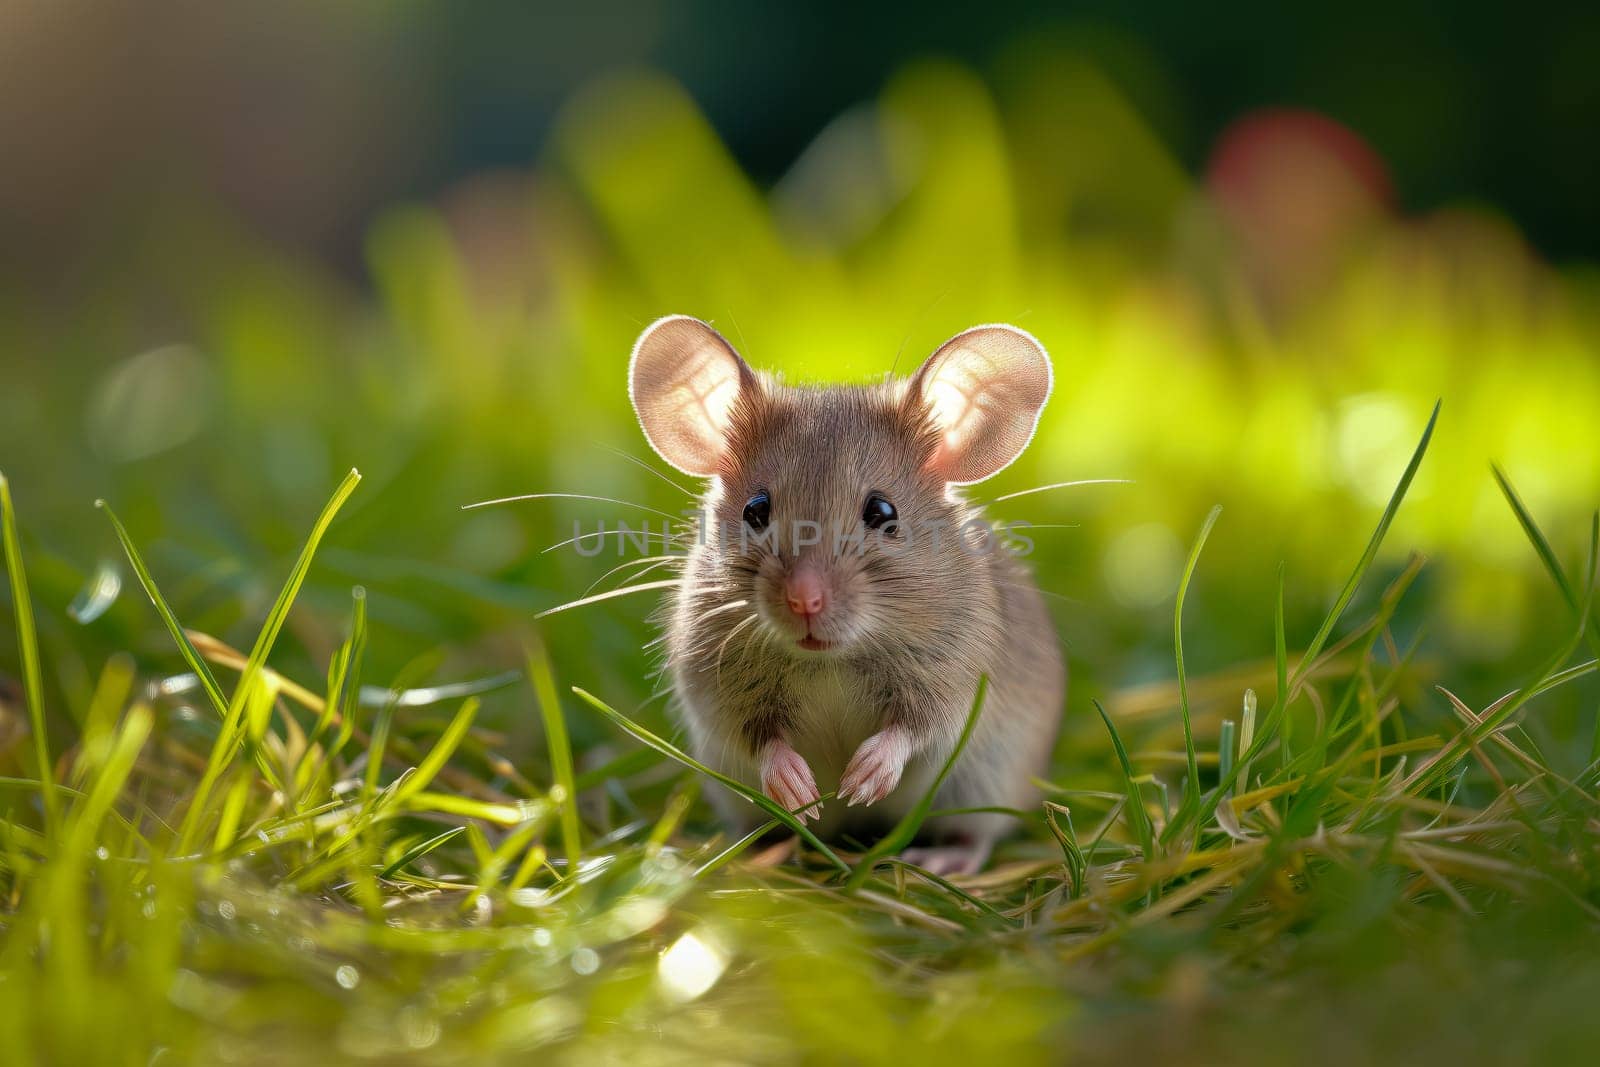 Mouse in Lush Green Grass by dimol